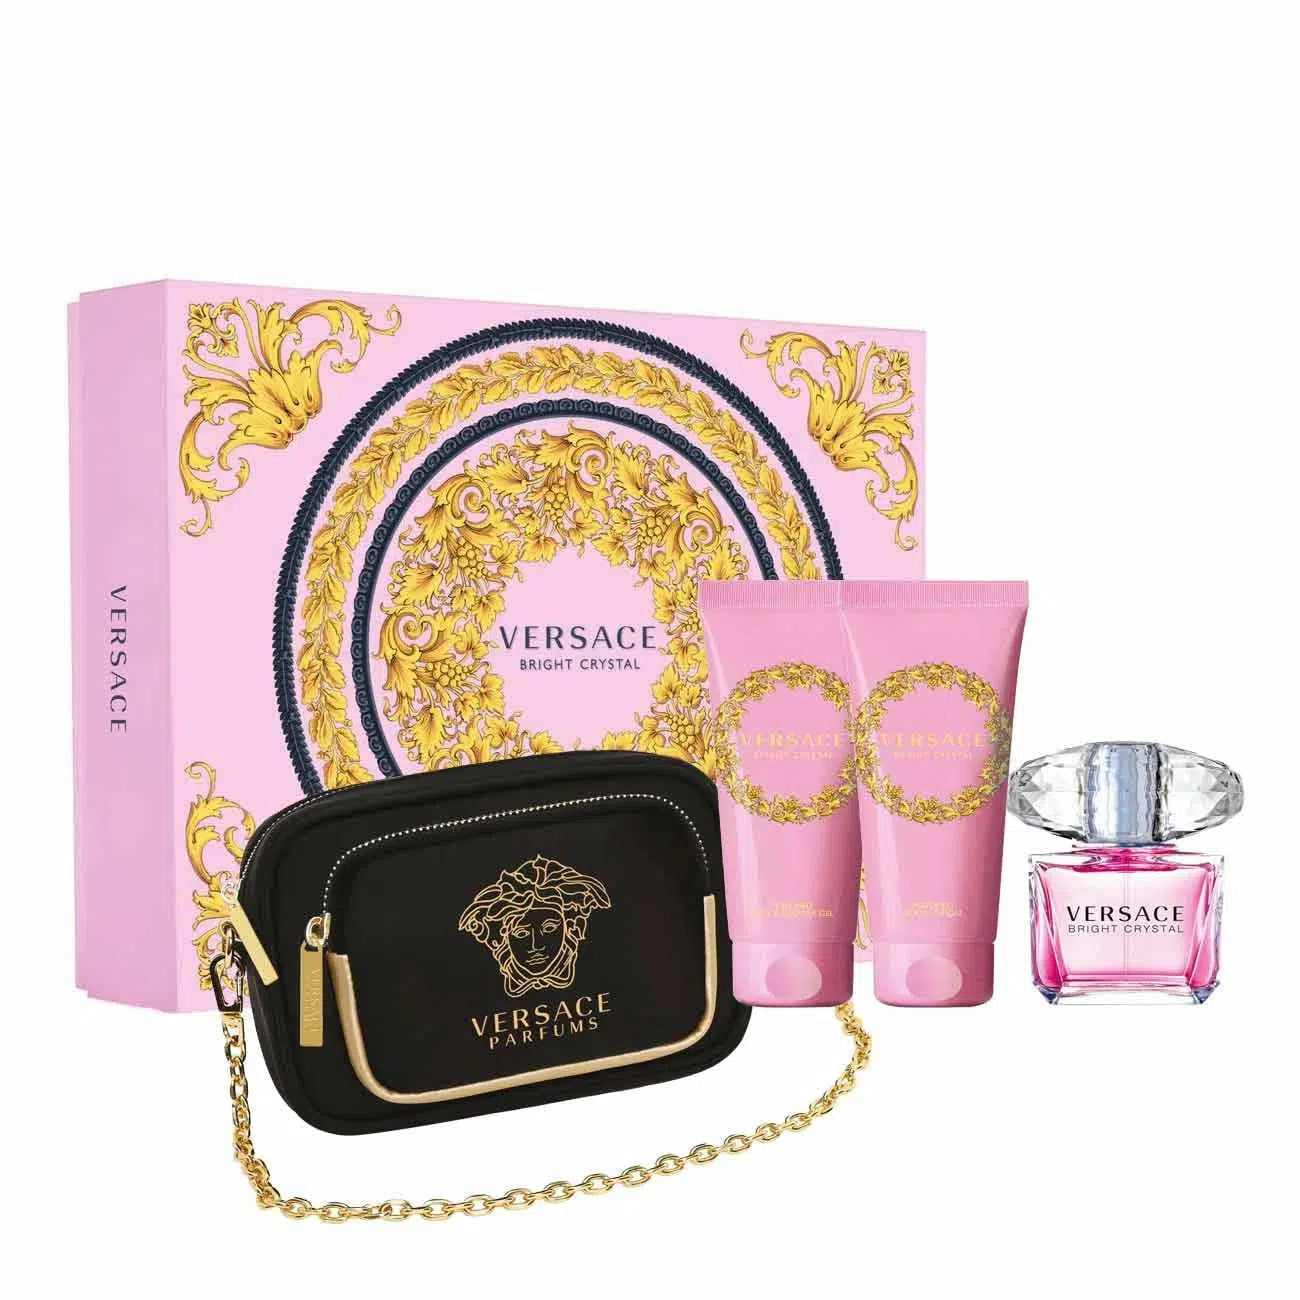 Buy Versace Bright Crystal 3-Piece with Versace Clutch Gift